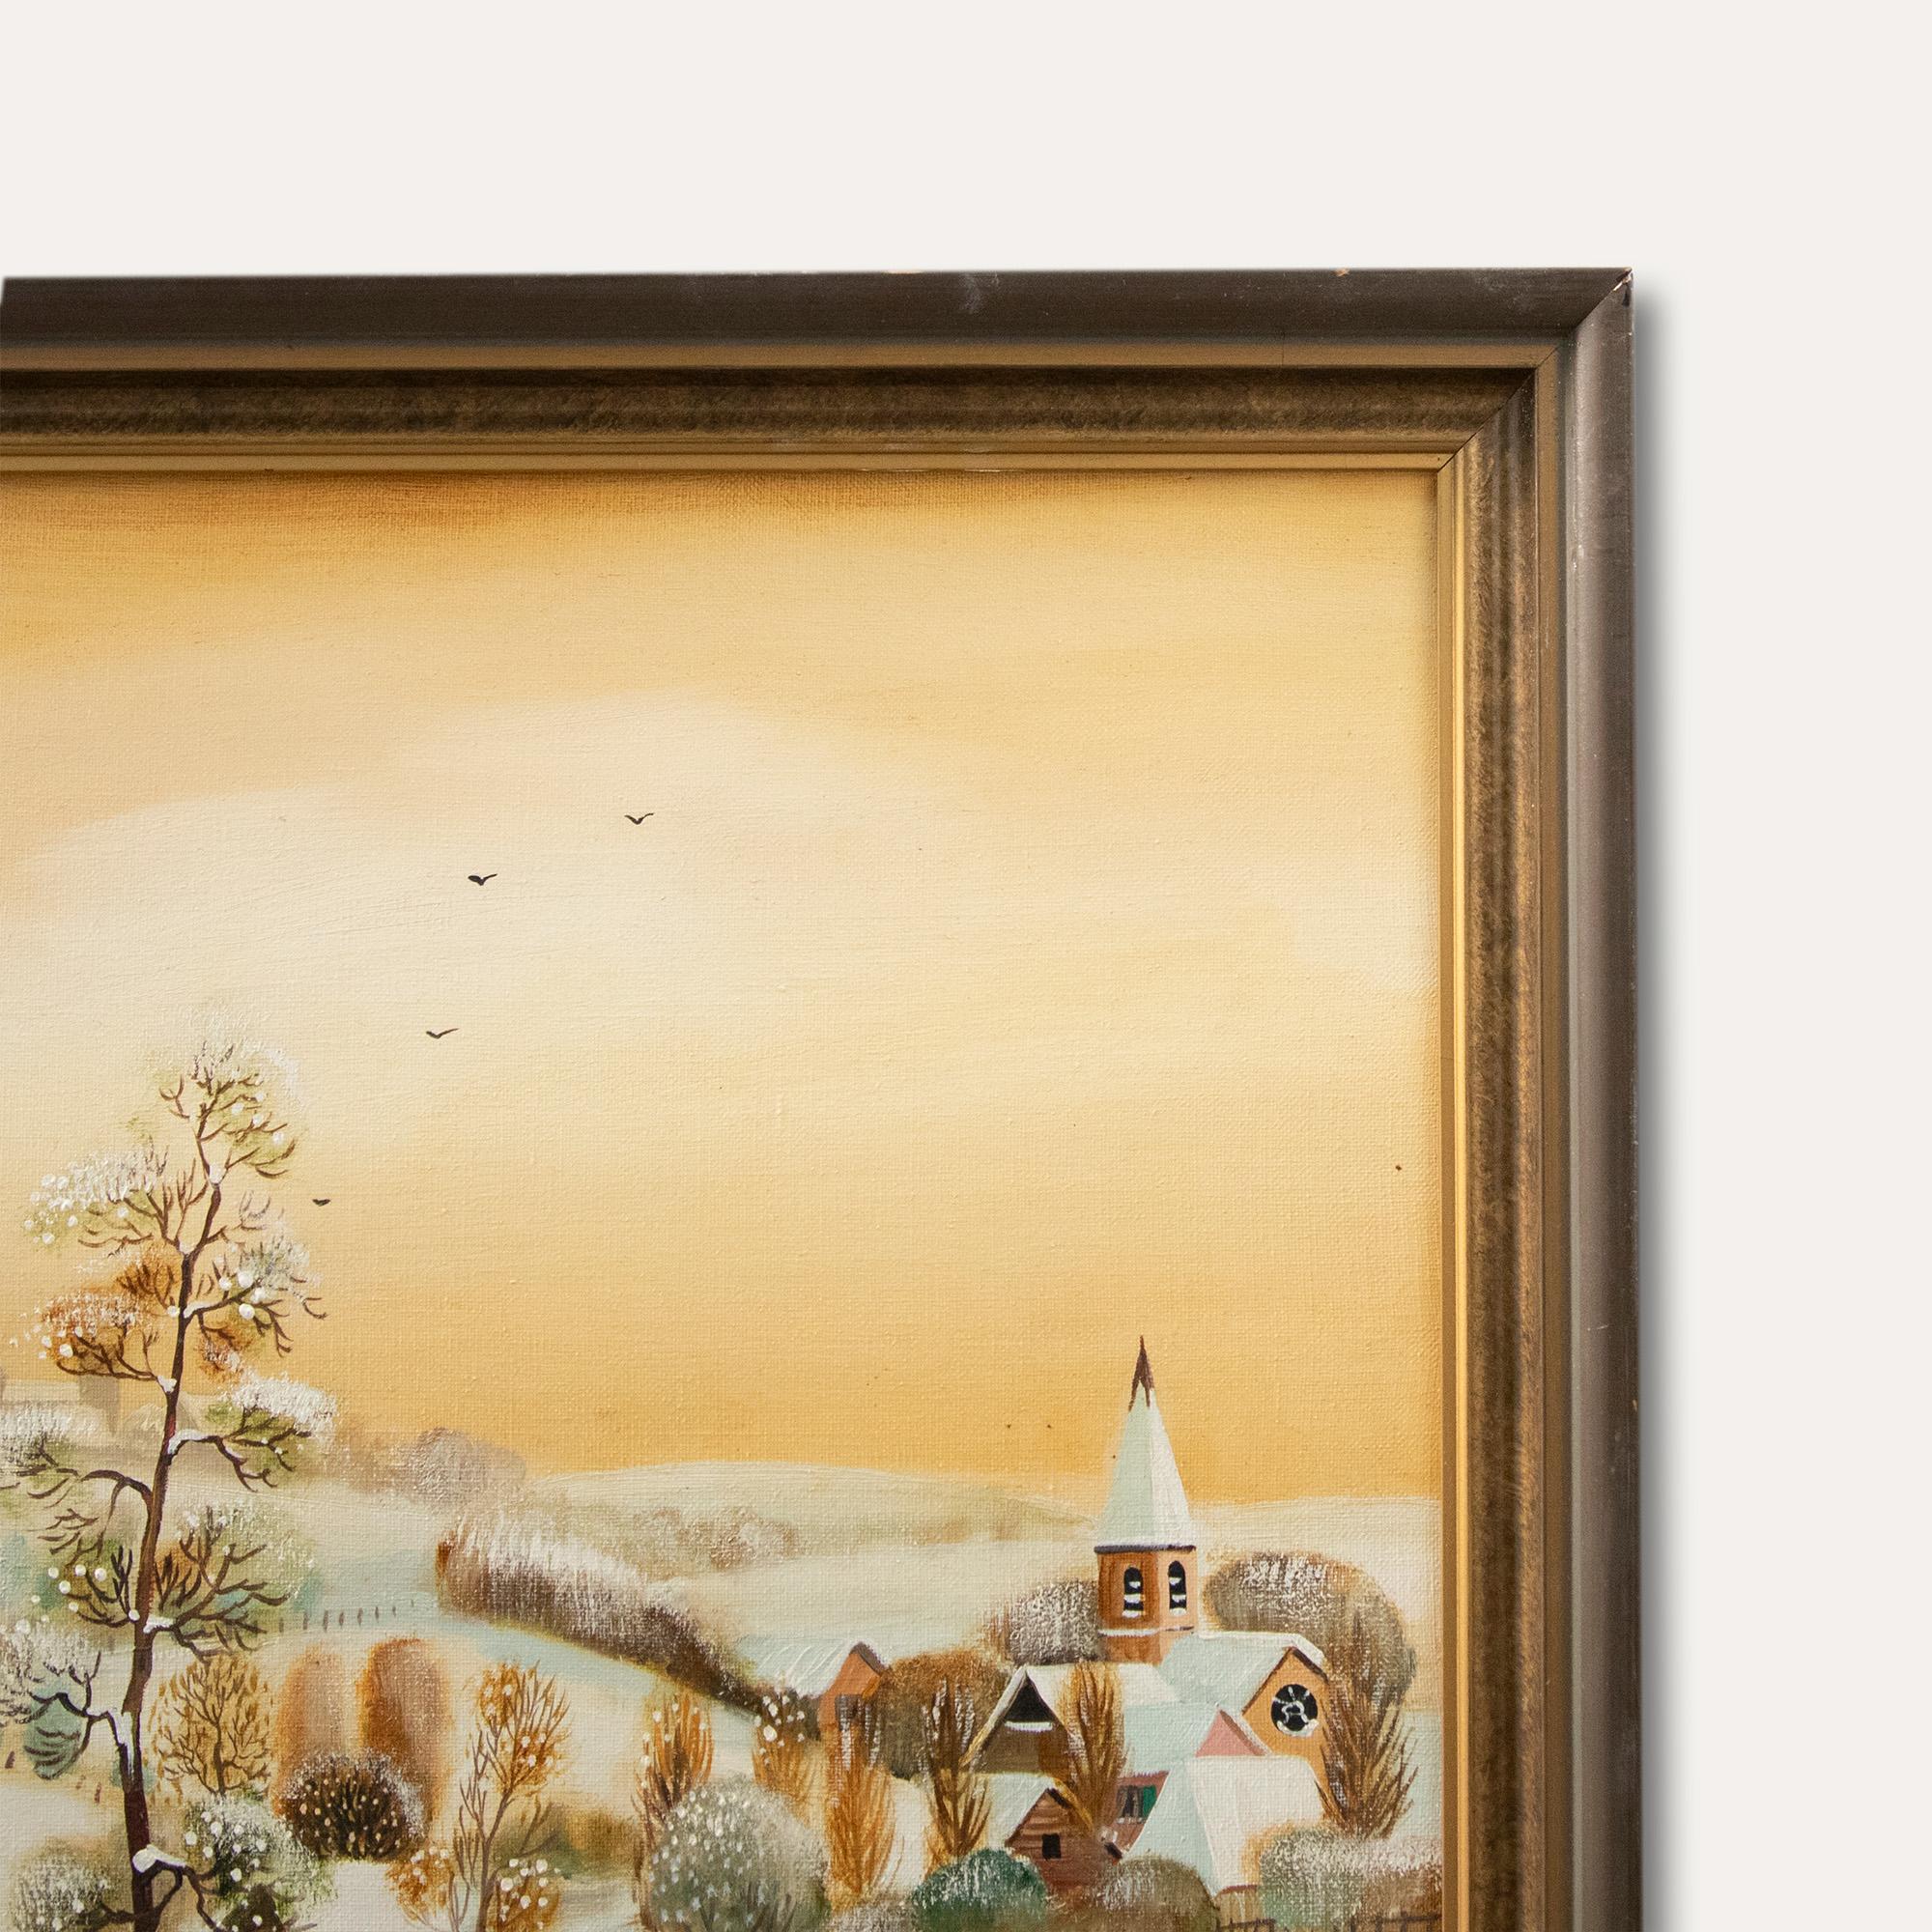 Paul Janos - Framed Contemporary Oil, A Winter Village - Painting by Unknown